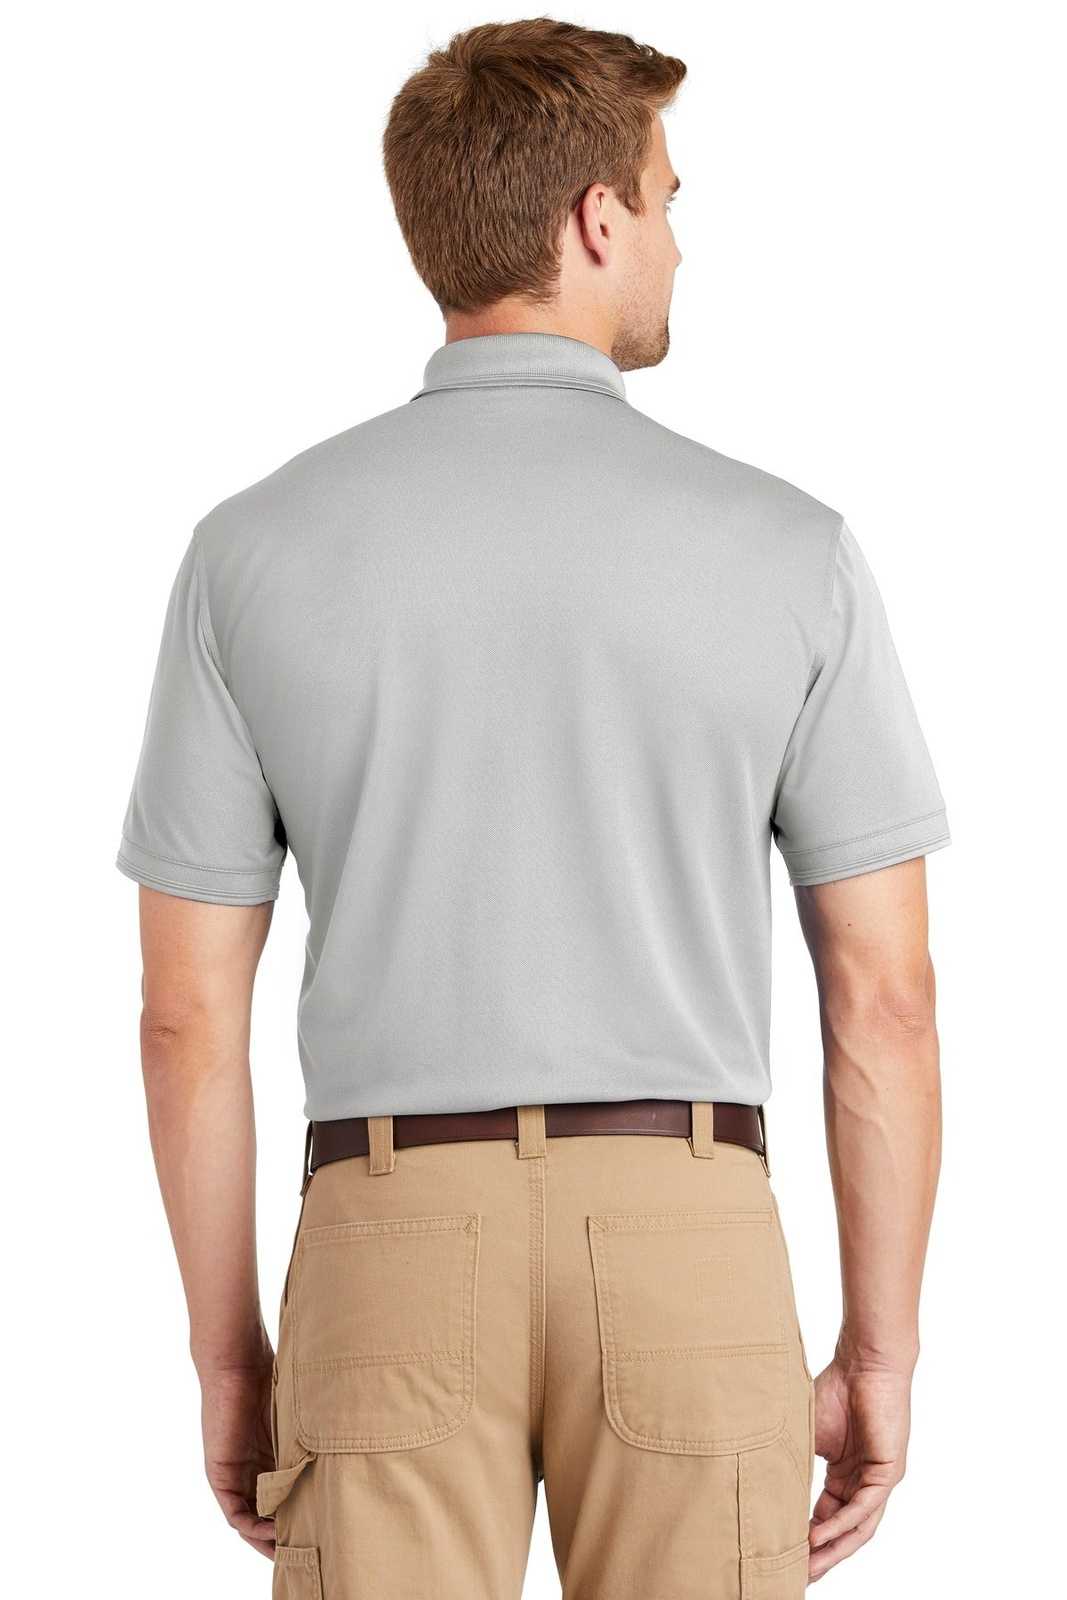 CornerStone CS4020 Industrial Snag-Proof Pique Polo - Light Gray - HIT a Double - 1